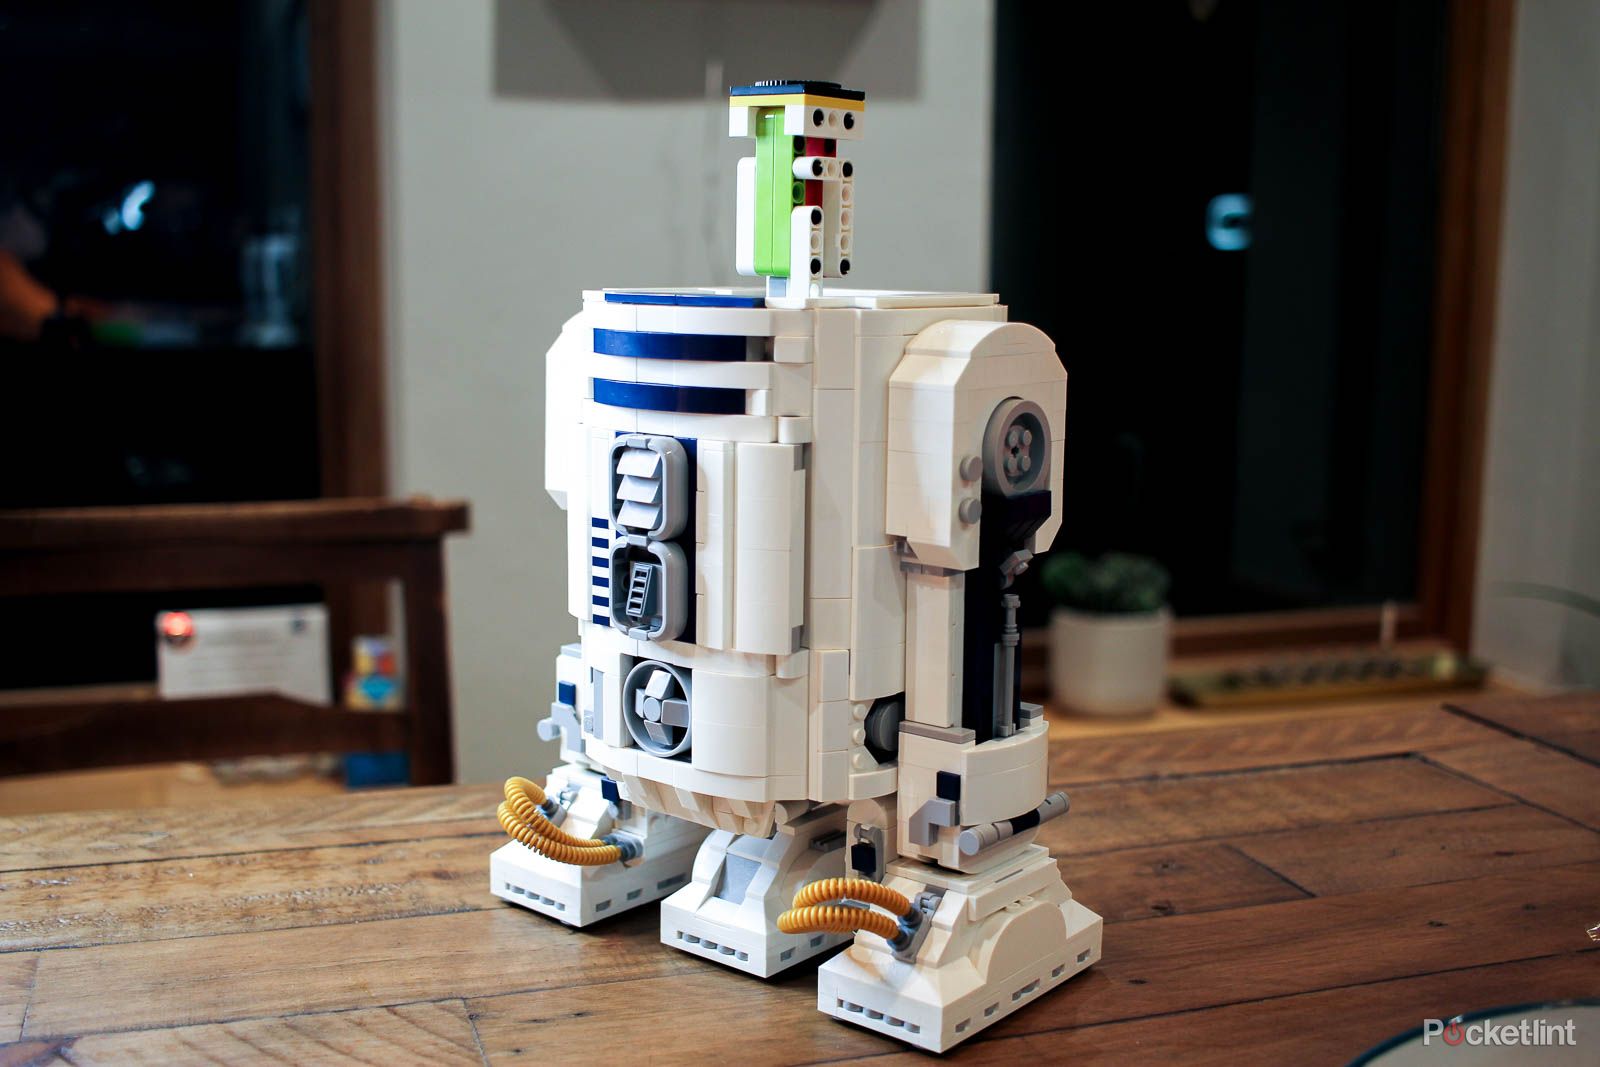 Lego R2-D2 hands on build pictures photo 5